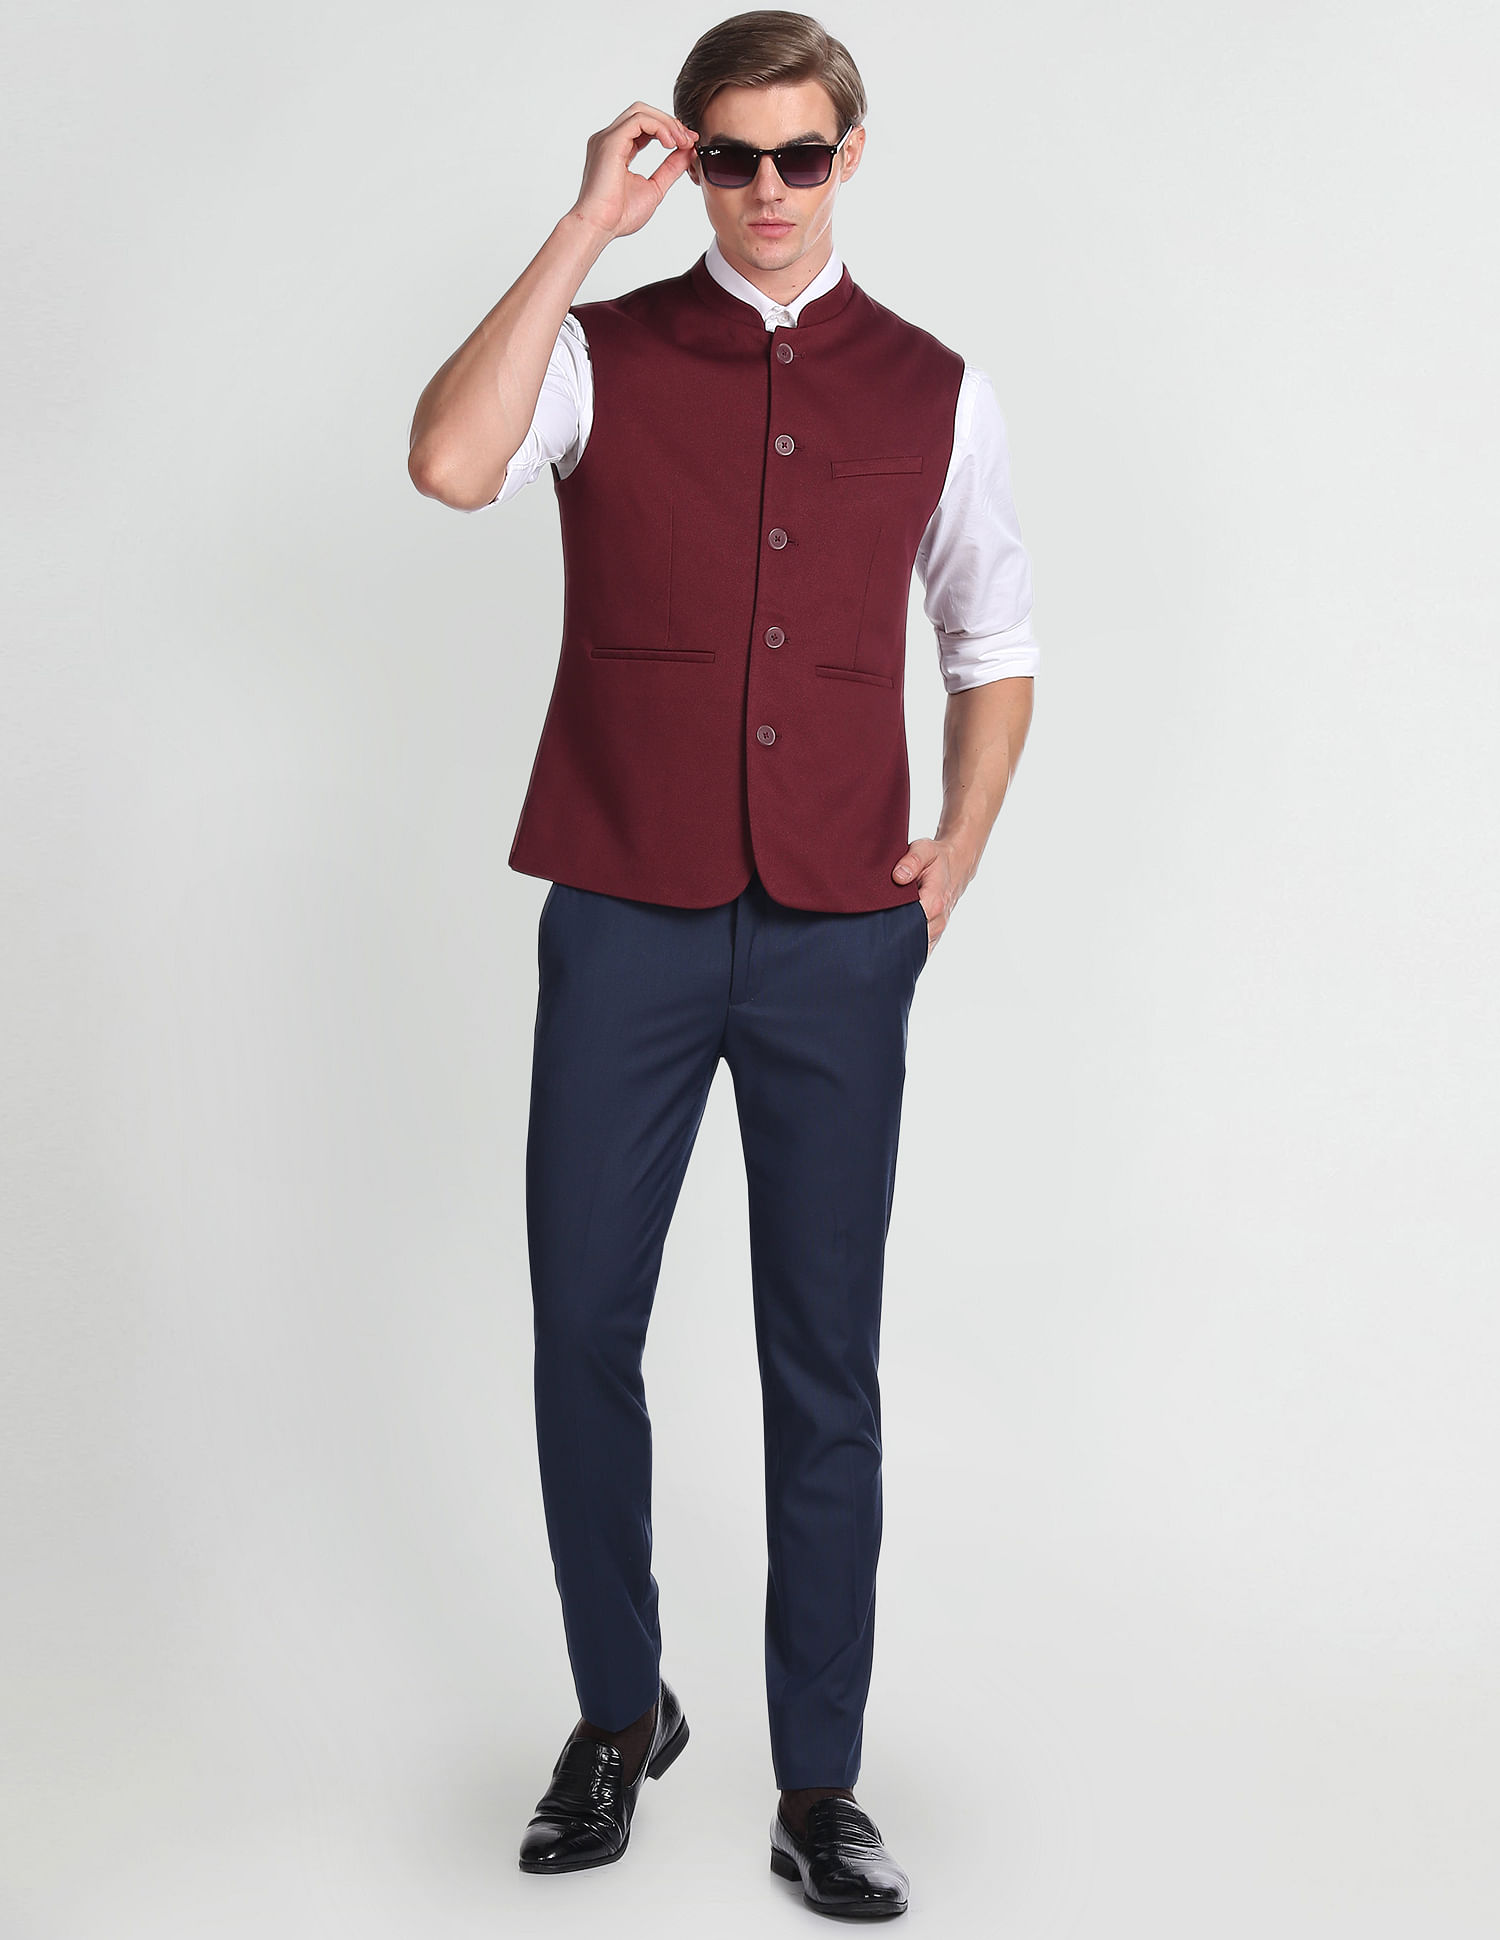 Exploring Different Types of Jackets for Kurtas: Nehru, Bandhgala, and